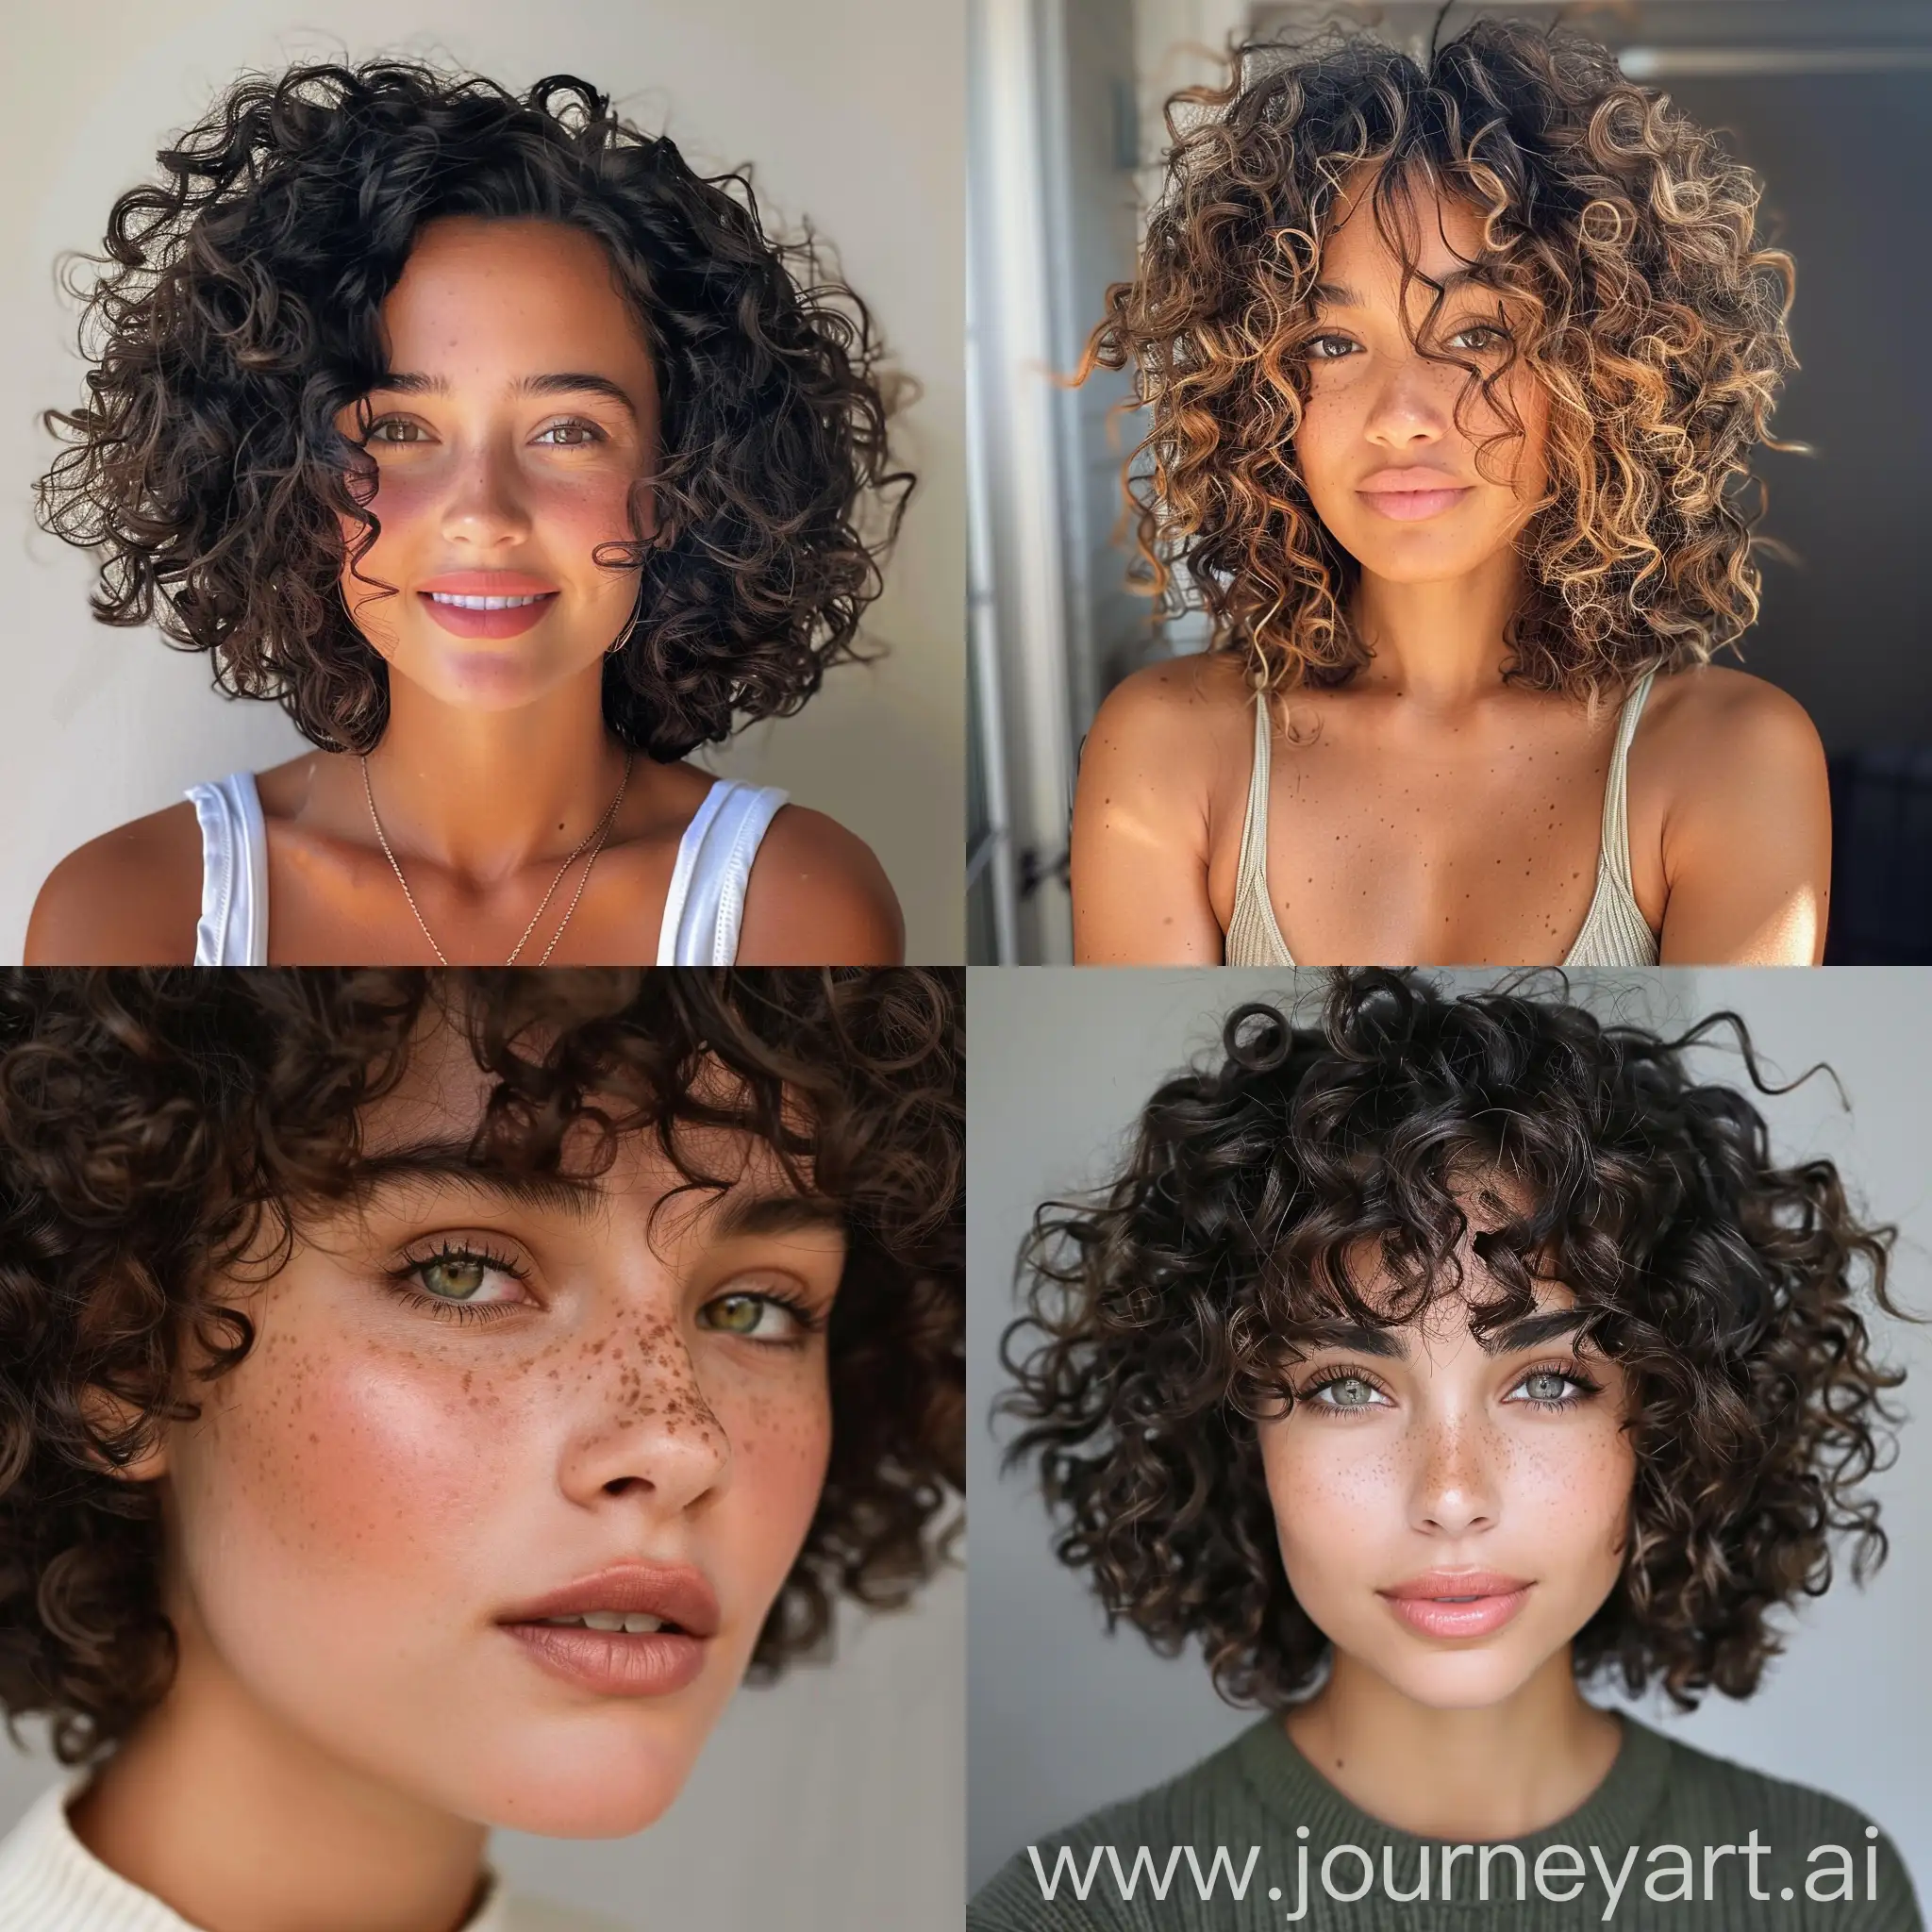 Elegant-Woman-with-Curly-Hair-in-Vibrant-Portrait